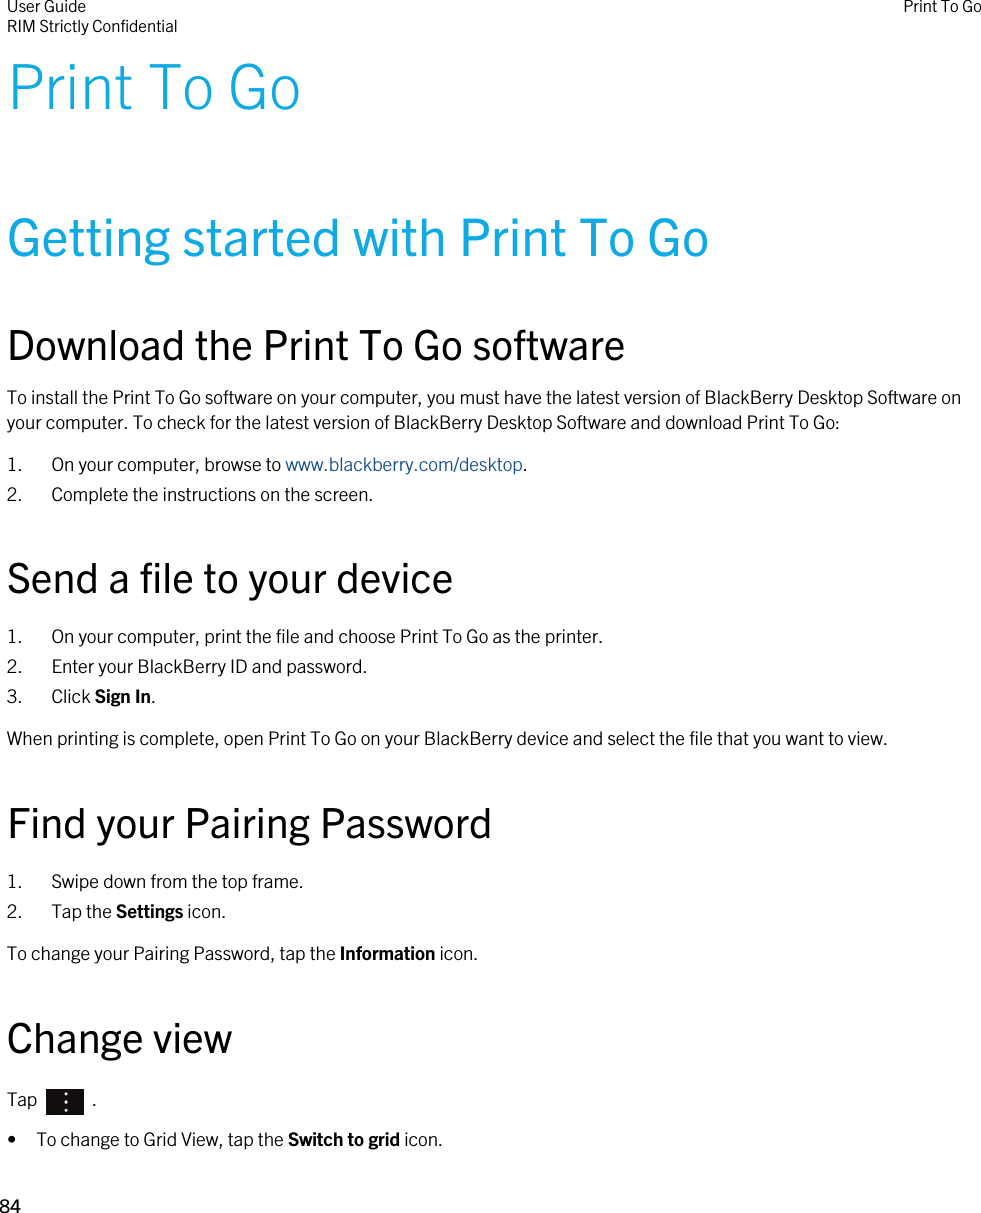 Print To GoGetting started with Print To GoDownload the Print To Go softwareTo install the Print To Go software on your computer, you must have the latest version of BlackBerry Desktop Software on your computer. To check for the latest version of BlackBerry Desktop Software and download Print To Go:1. On your computer, browse to www.blackberry.com/desktop.2. Complete the instructions on the screen.Send a file to your device1. On your computer, print the file and choose Print To Go as the printer.2. Enter your BlackBerry ID and password.3. Click Sign In.When printing is complete, open Print To Go on your BlackBerry device and select the file that you want to view.Find your Pairing Password1. Swipe down from the top frame.2. Tap the Settings icon.To change your Pairing Password, tap the Information icon.Change viewTap    .• To change to Grid View, tap the Switch to grid icon.User GuideRIM Strictly Confidential Print To Go84 